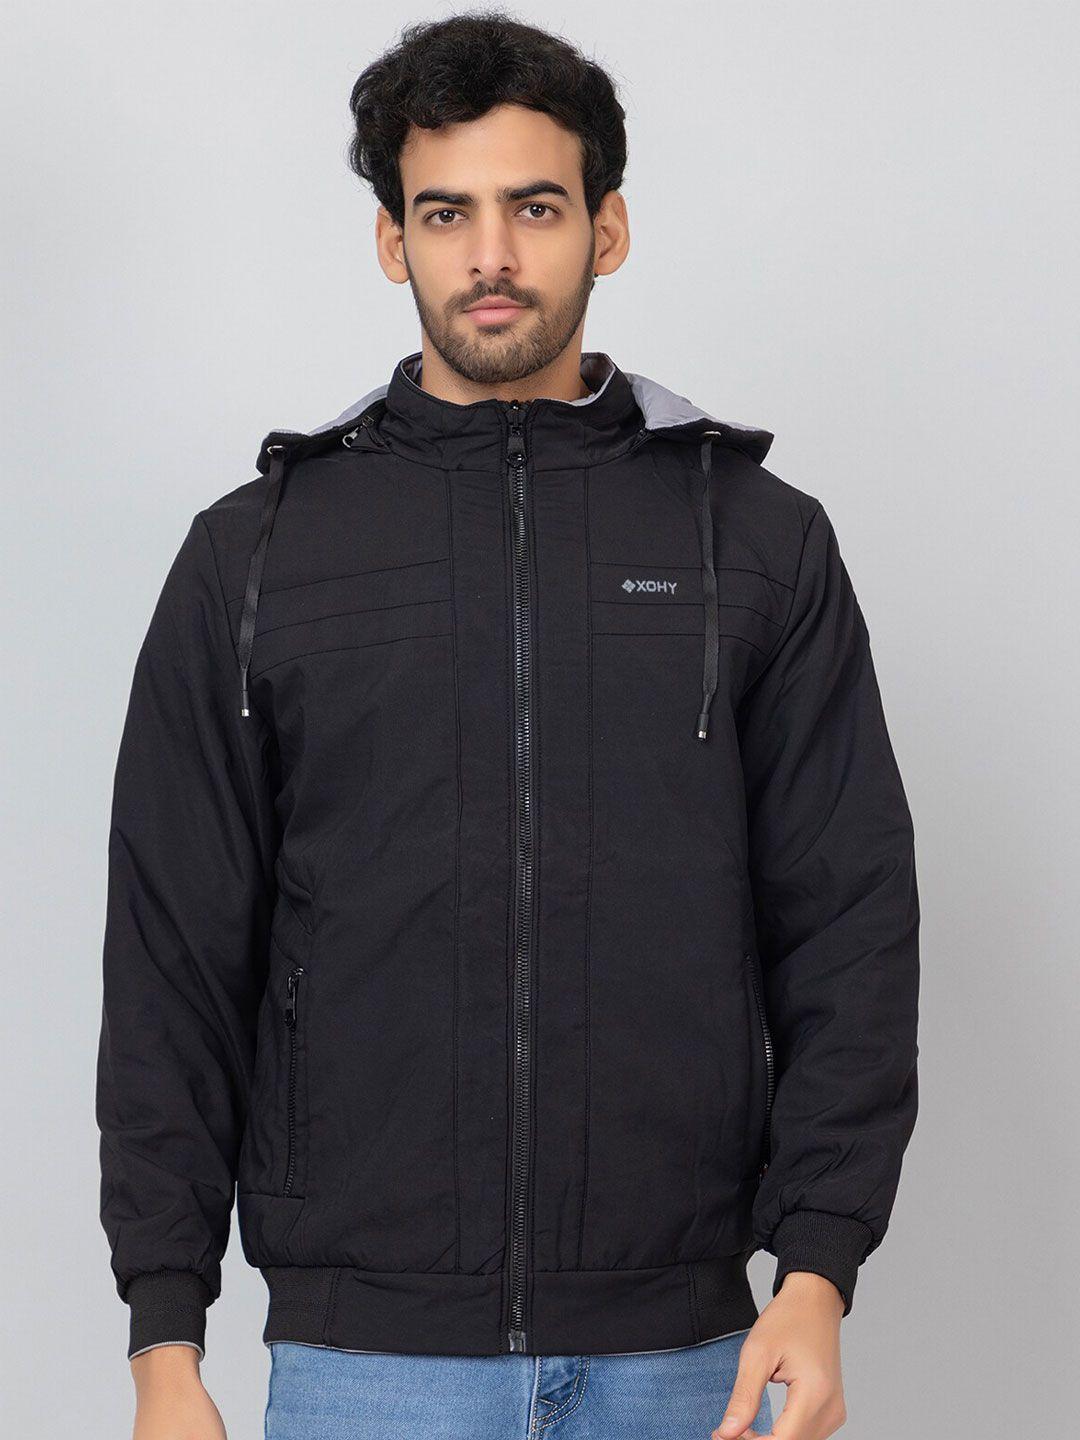 xohy lightweight hooded cotton bomber jacket